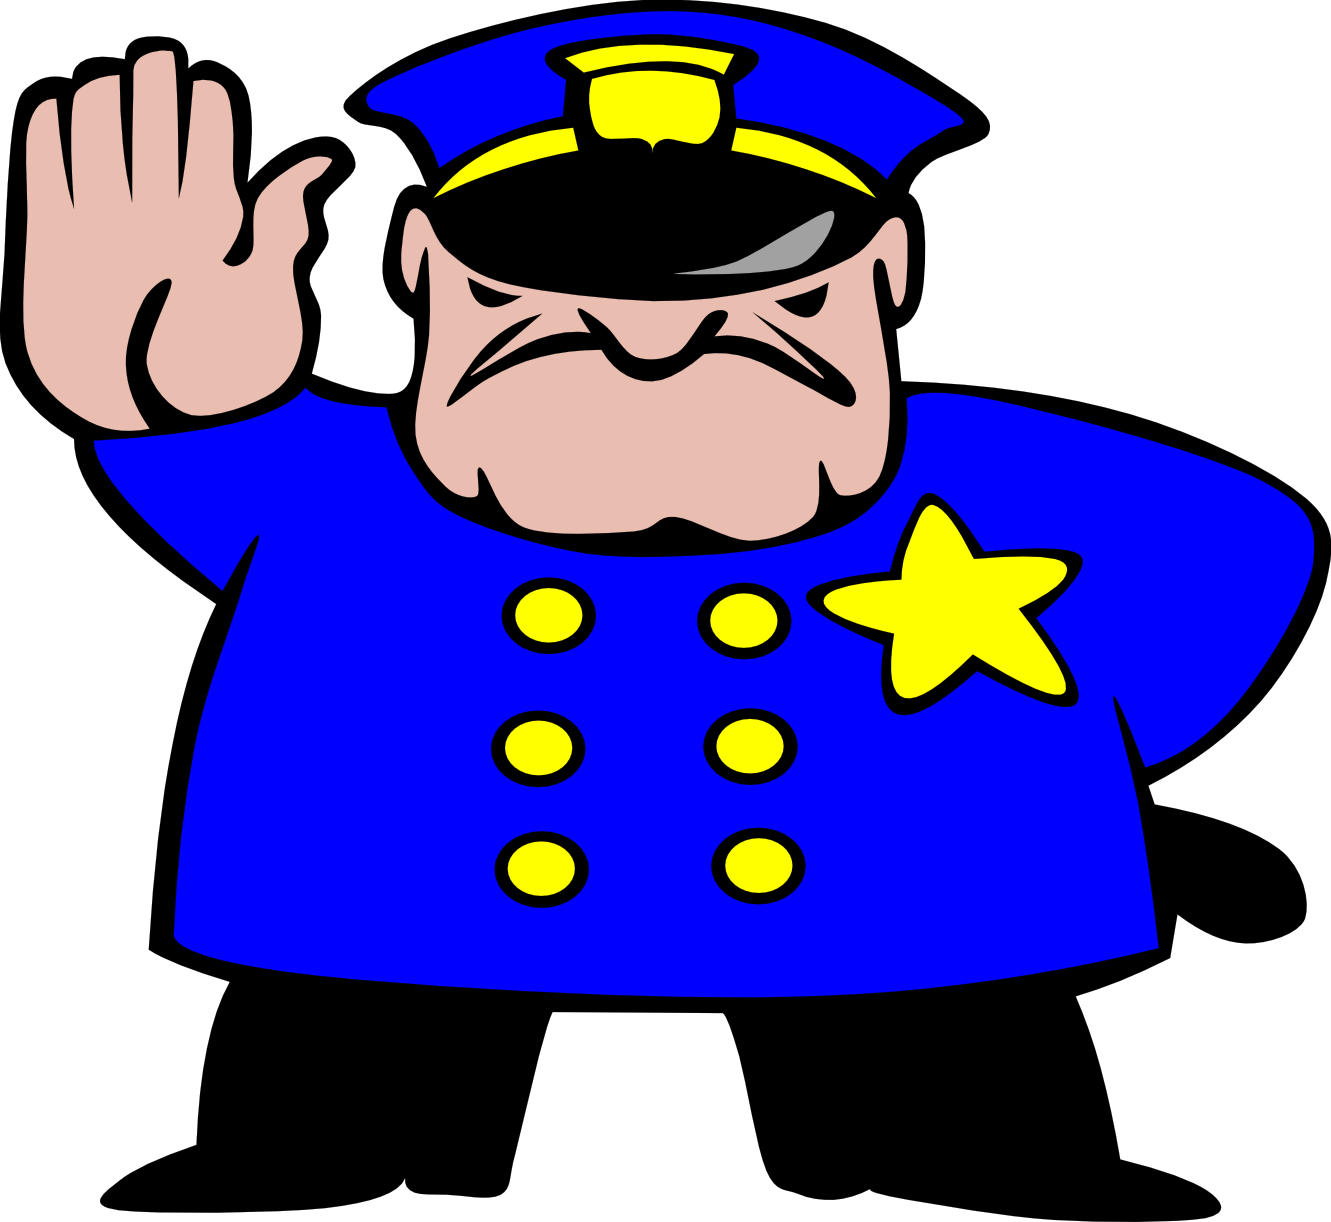 Police officer badge clipart free images